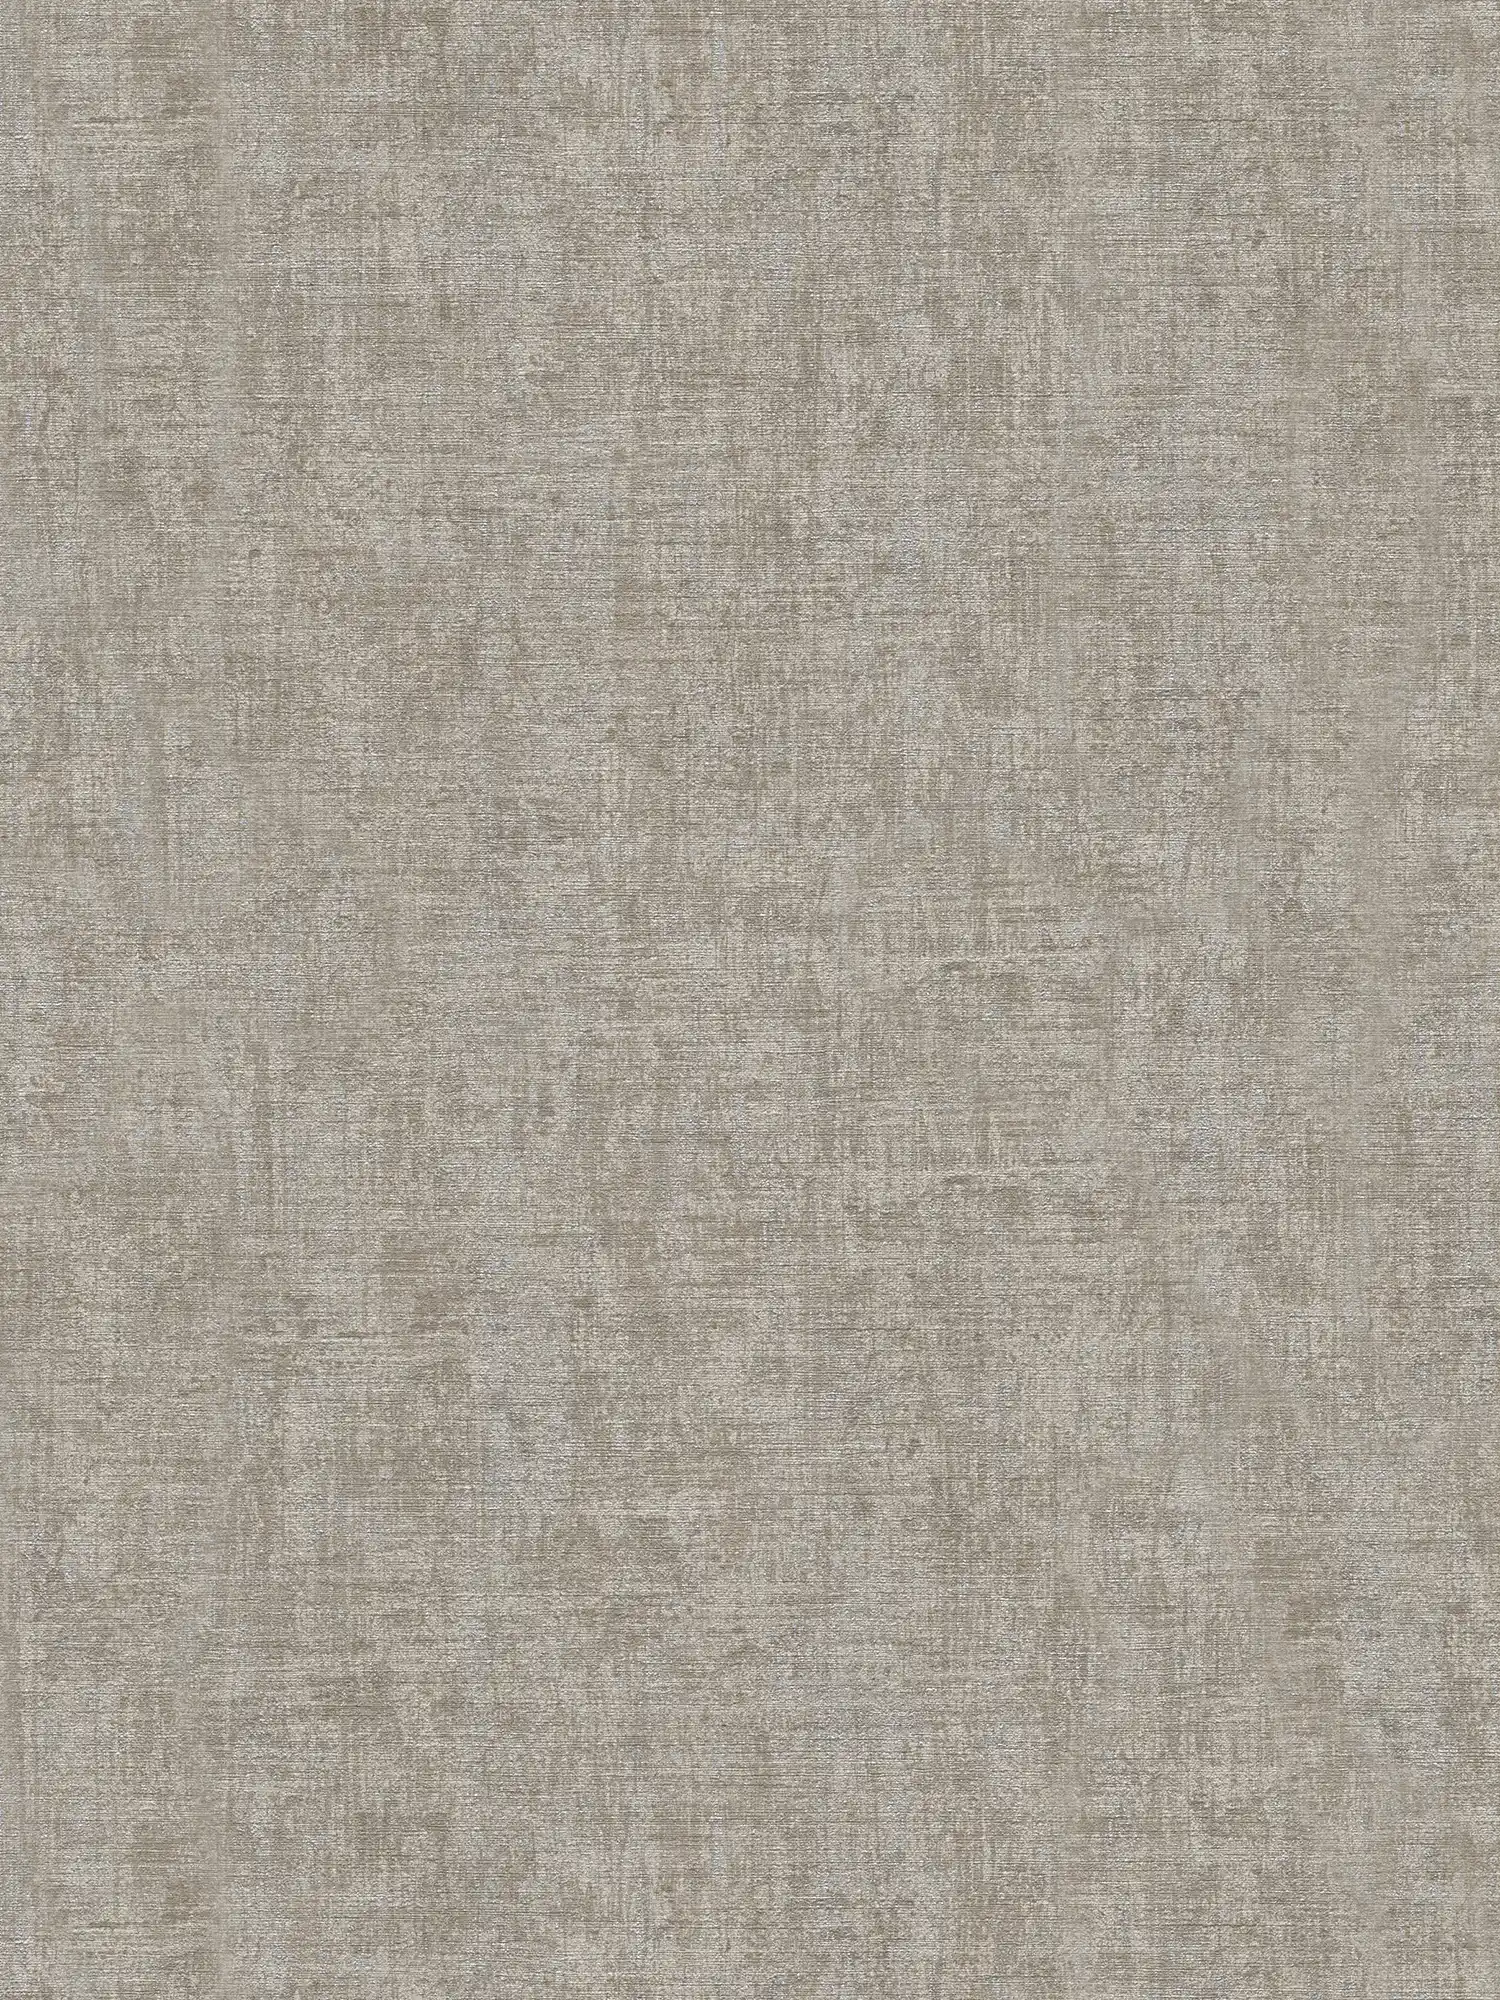 Brown wallpaper mottled with silver metallic accents
